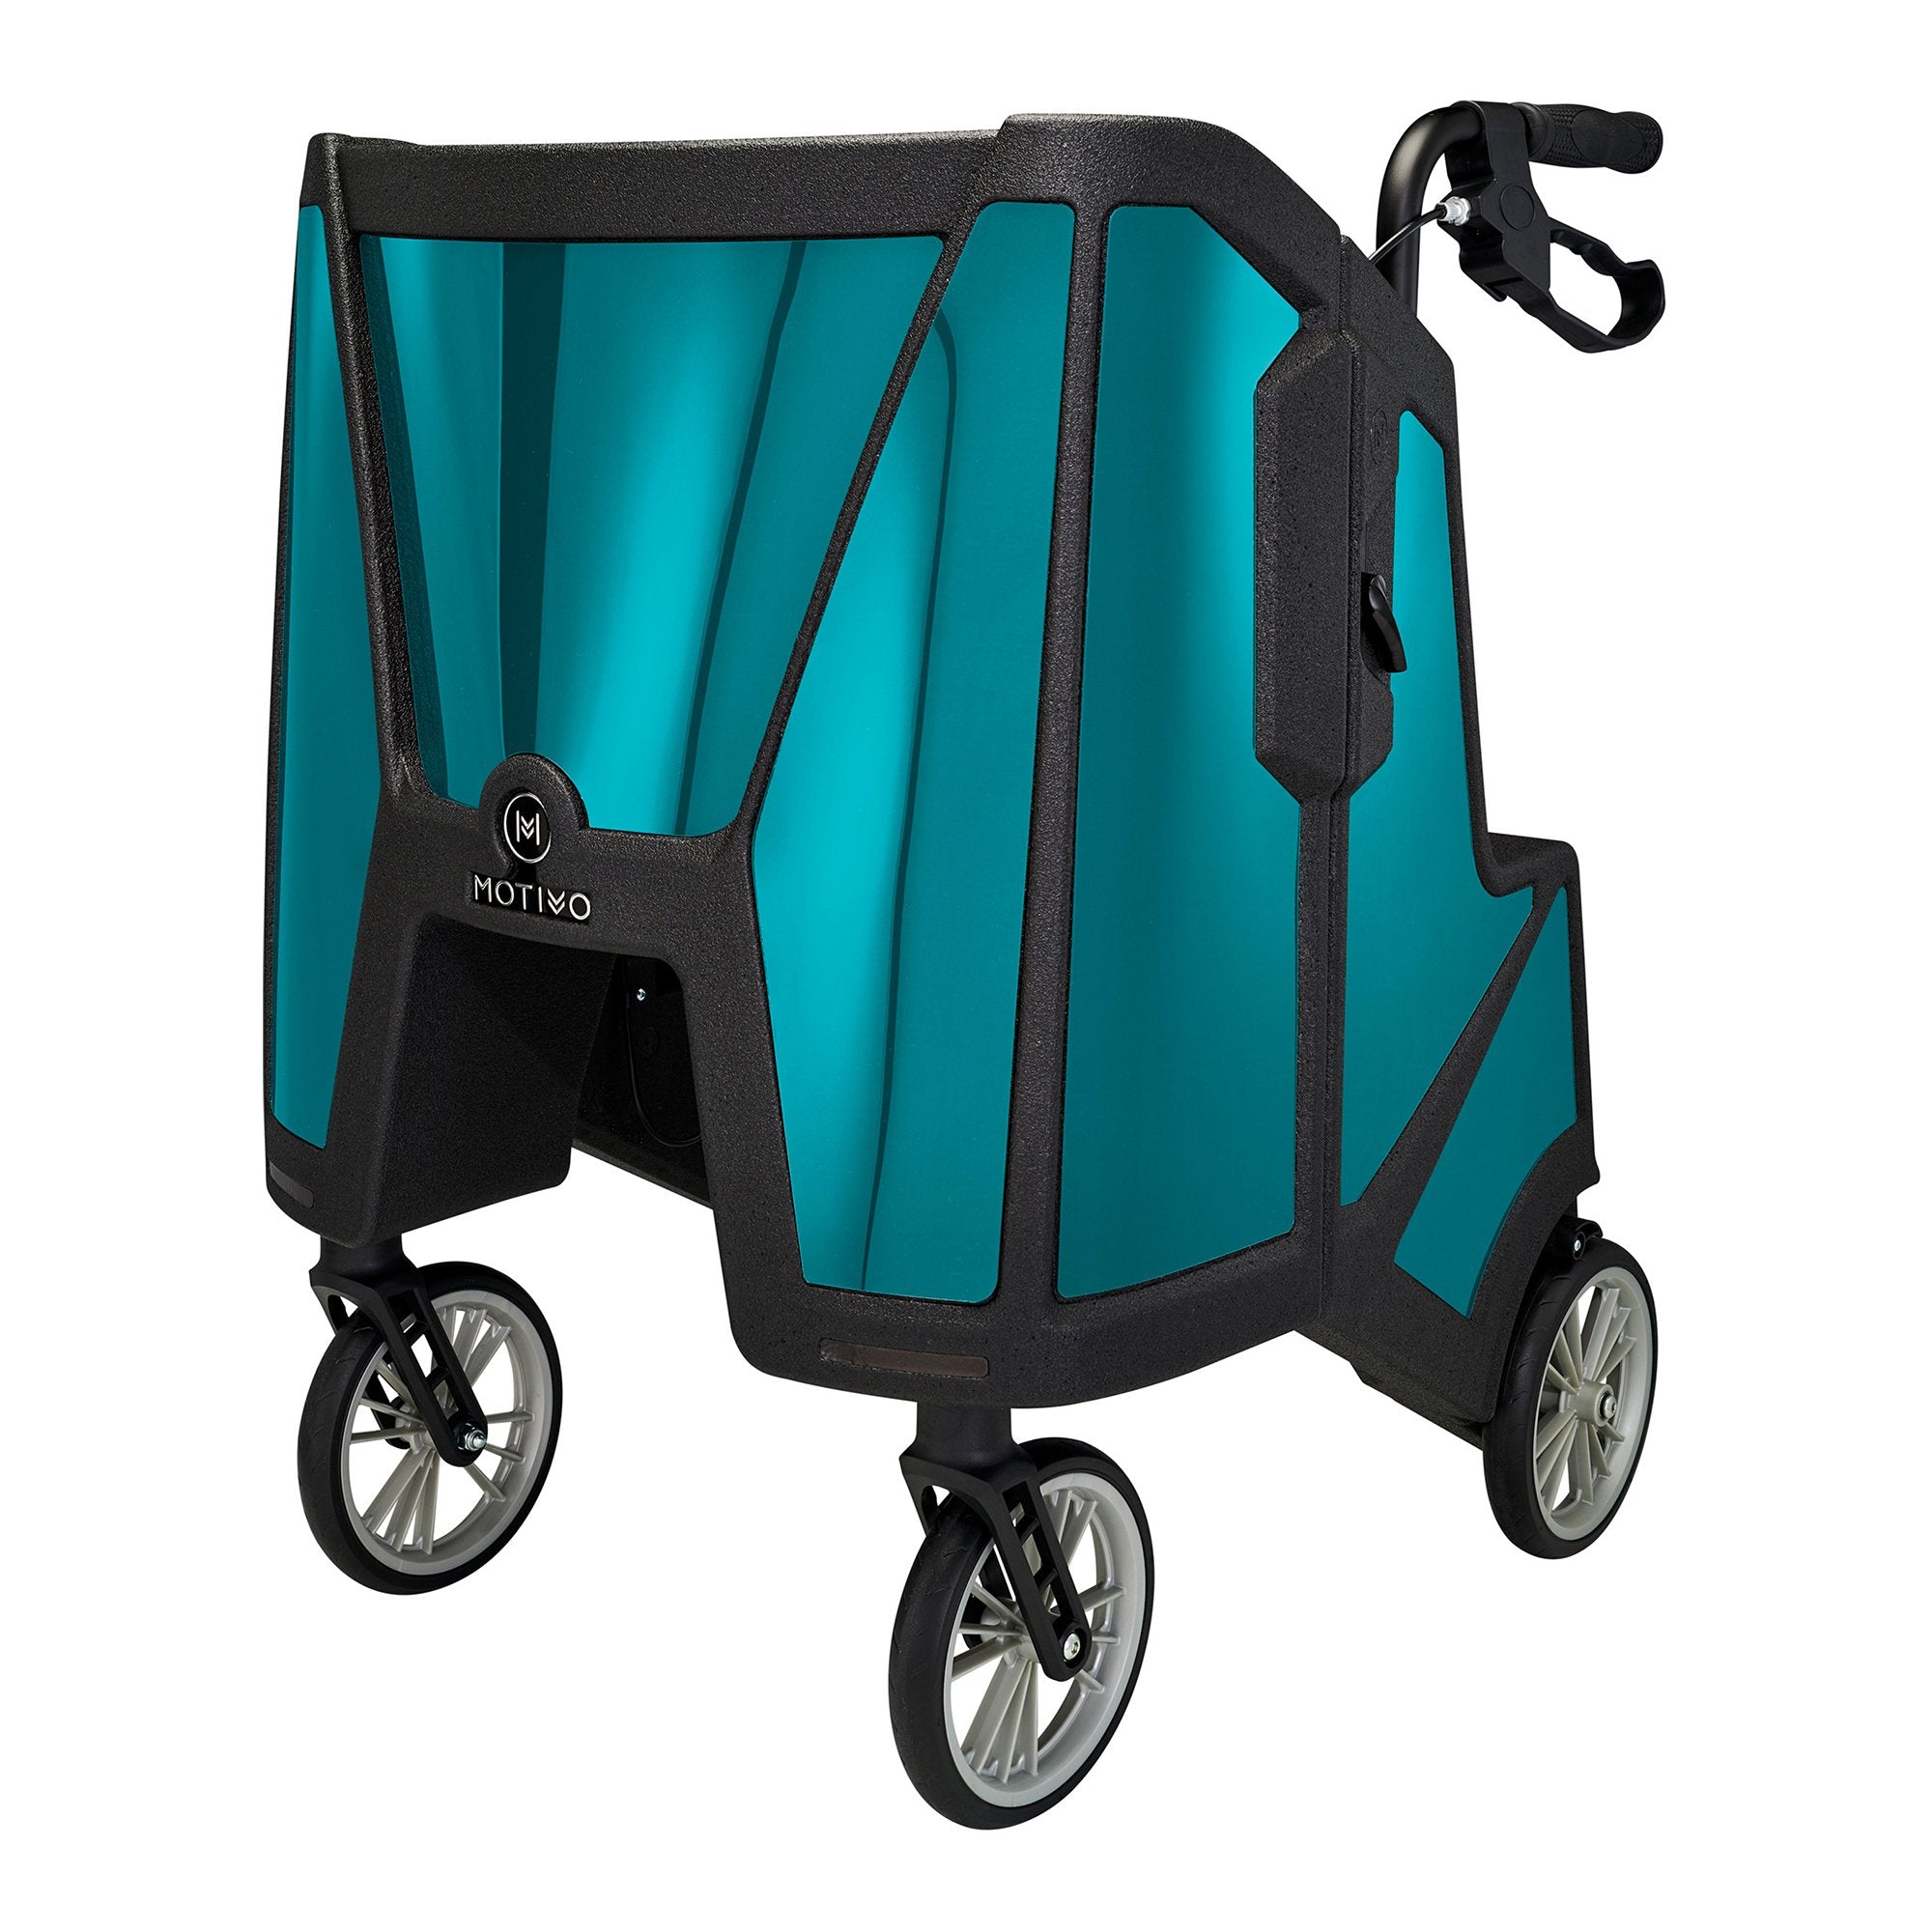 Tour Four-Wheel Rollator, 31 to 37 Inch Handle Height, Ocean Teal (1 Unit)